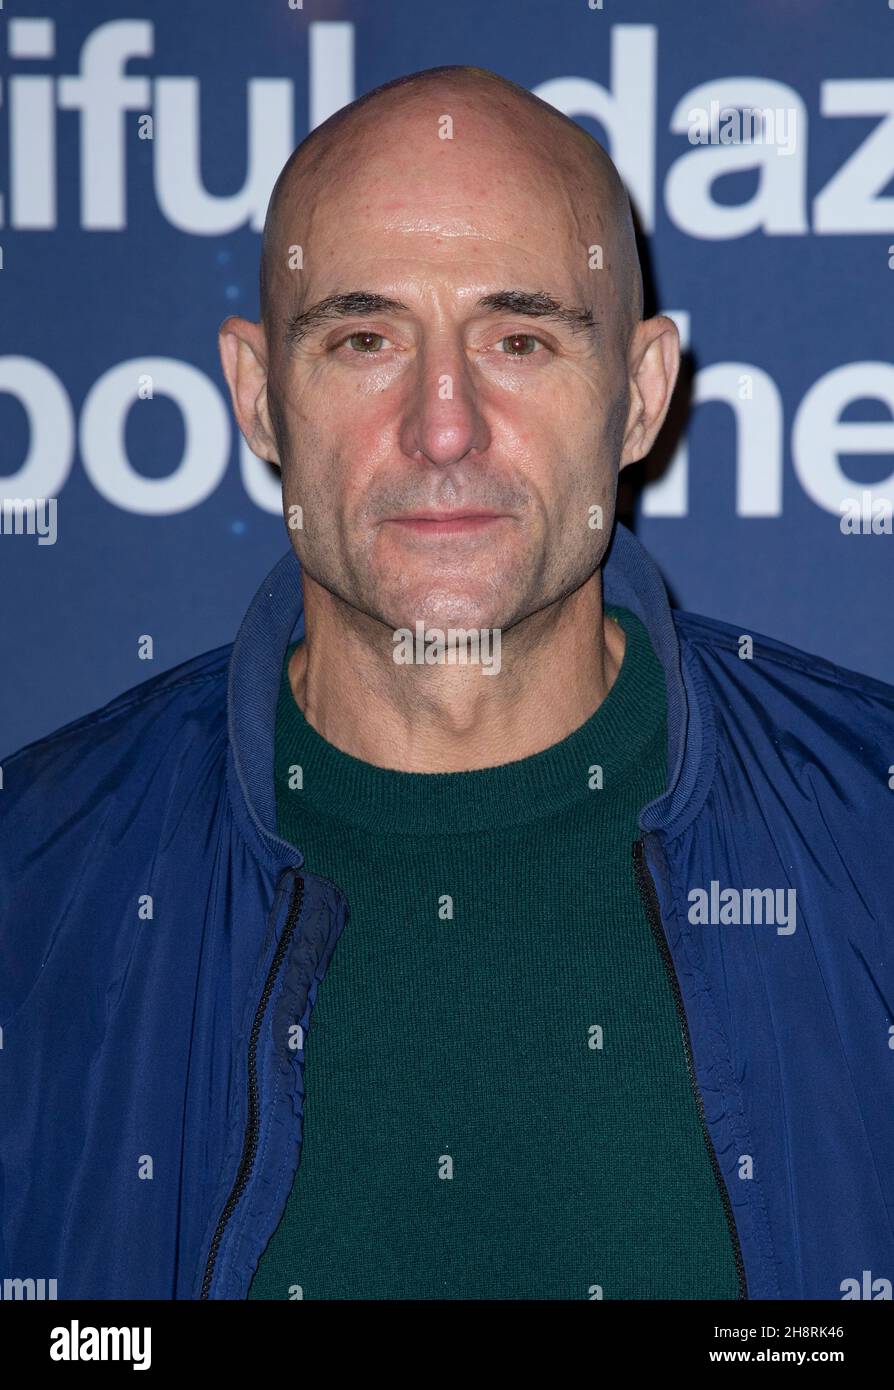 LONDON, ENGLAND - DECEMBER 1: Mark Strong attends the Opening Performance of The Curious Incident of the Dog in the Night-Time on December 1, 2021 in London, England. Photo by Gary Mitchell Credit: Gary Mitchell, GMP Media/Alamy Live News Stock Photo